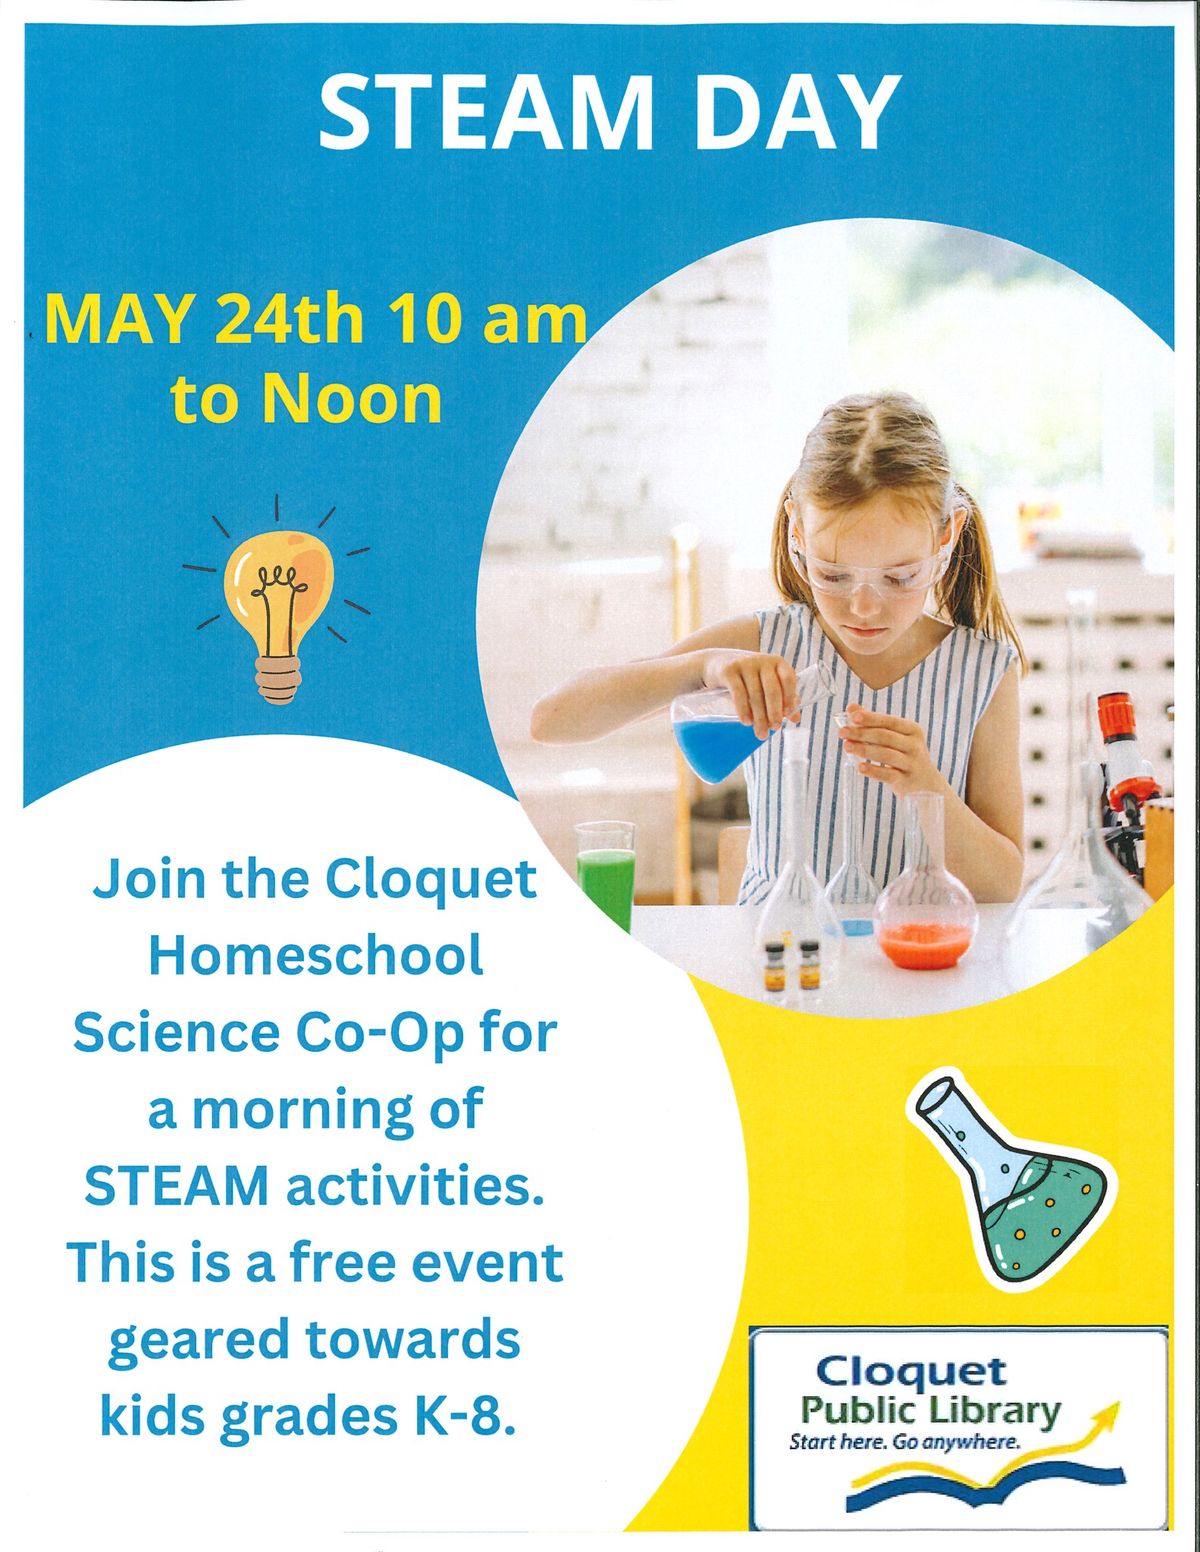 STEAM Day with Cloquet Home School Science Co-op